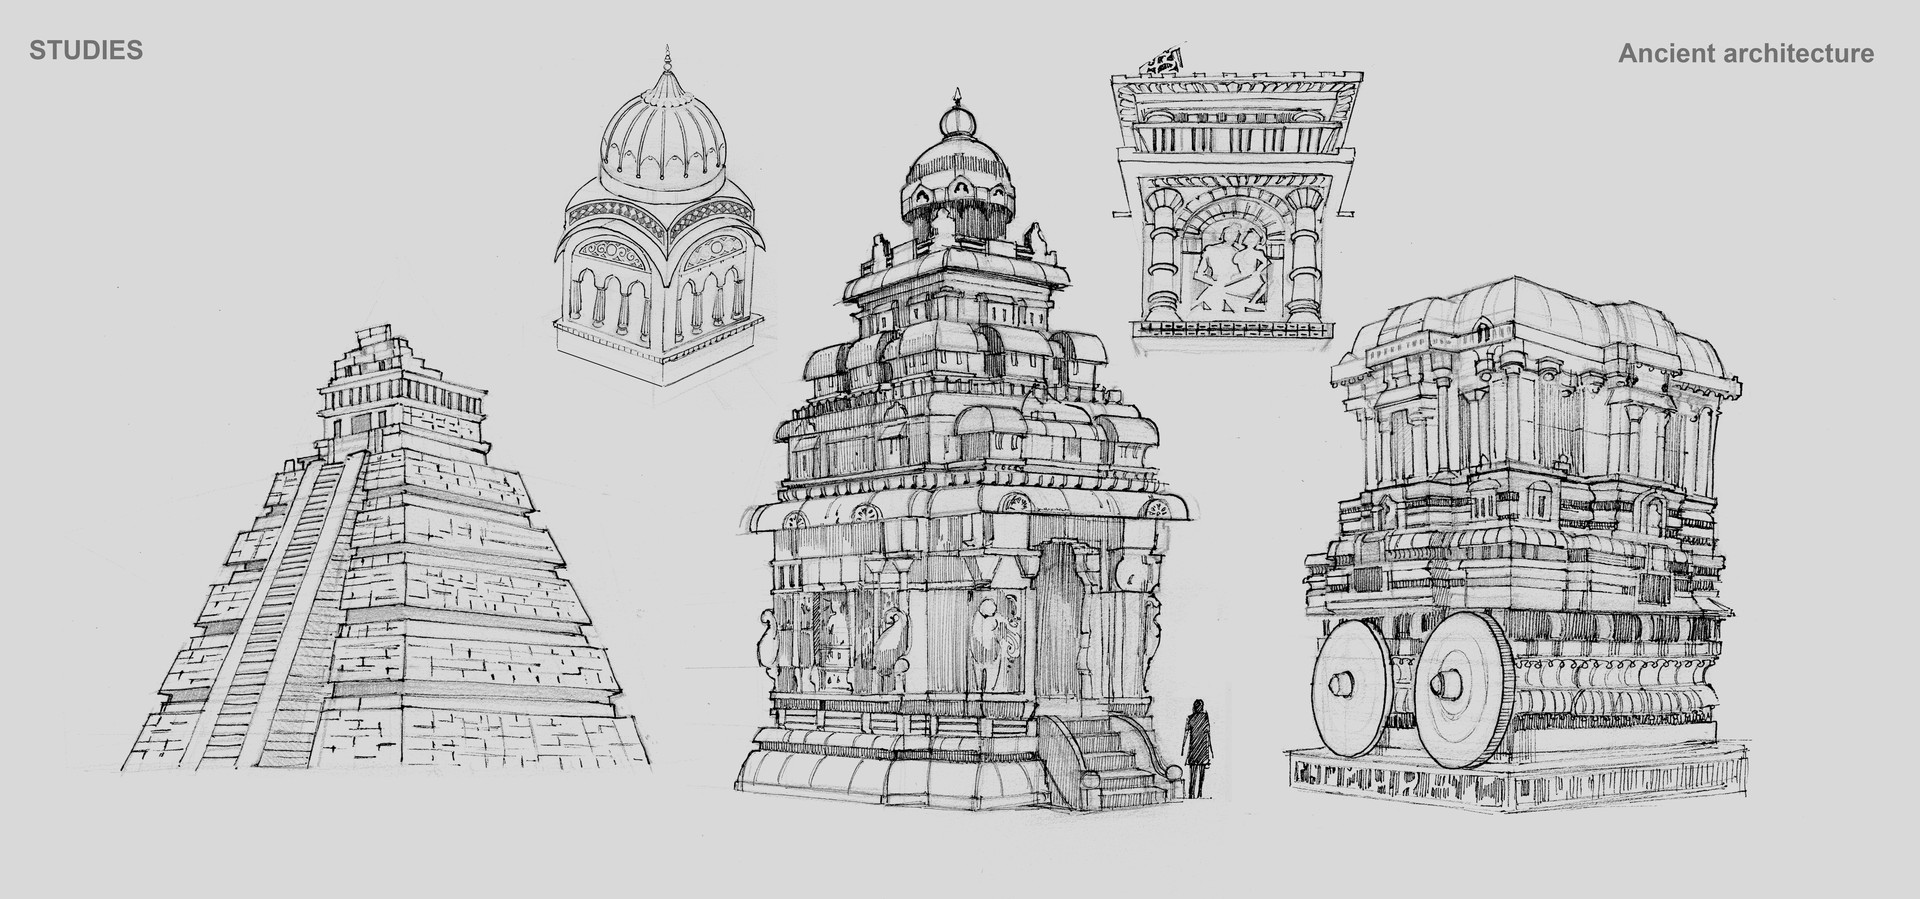 Heritage of India Temples of India sketches from India illustrated with  pen and pencil vintage book